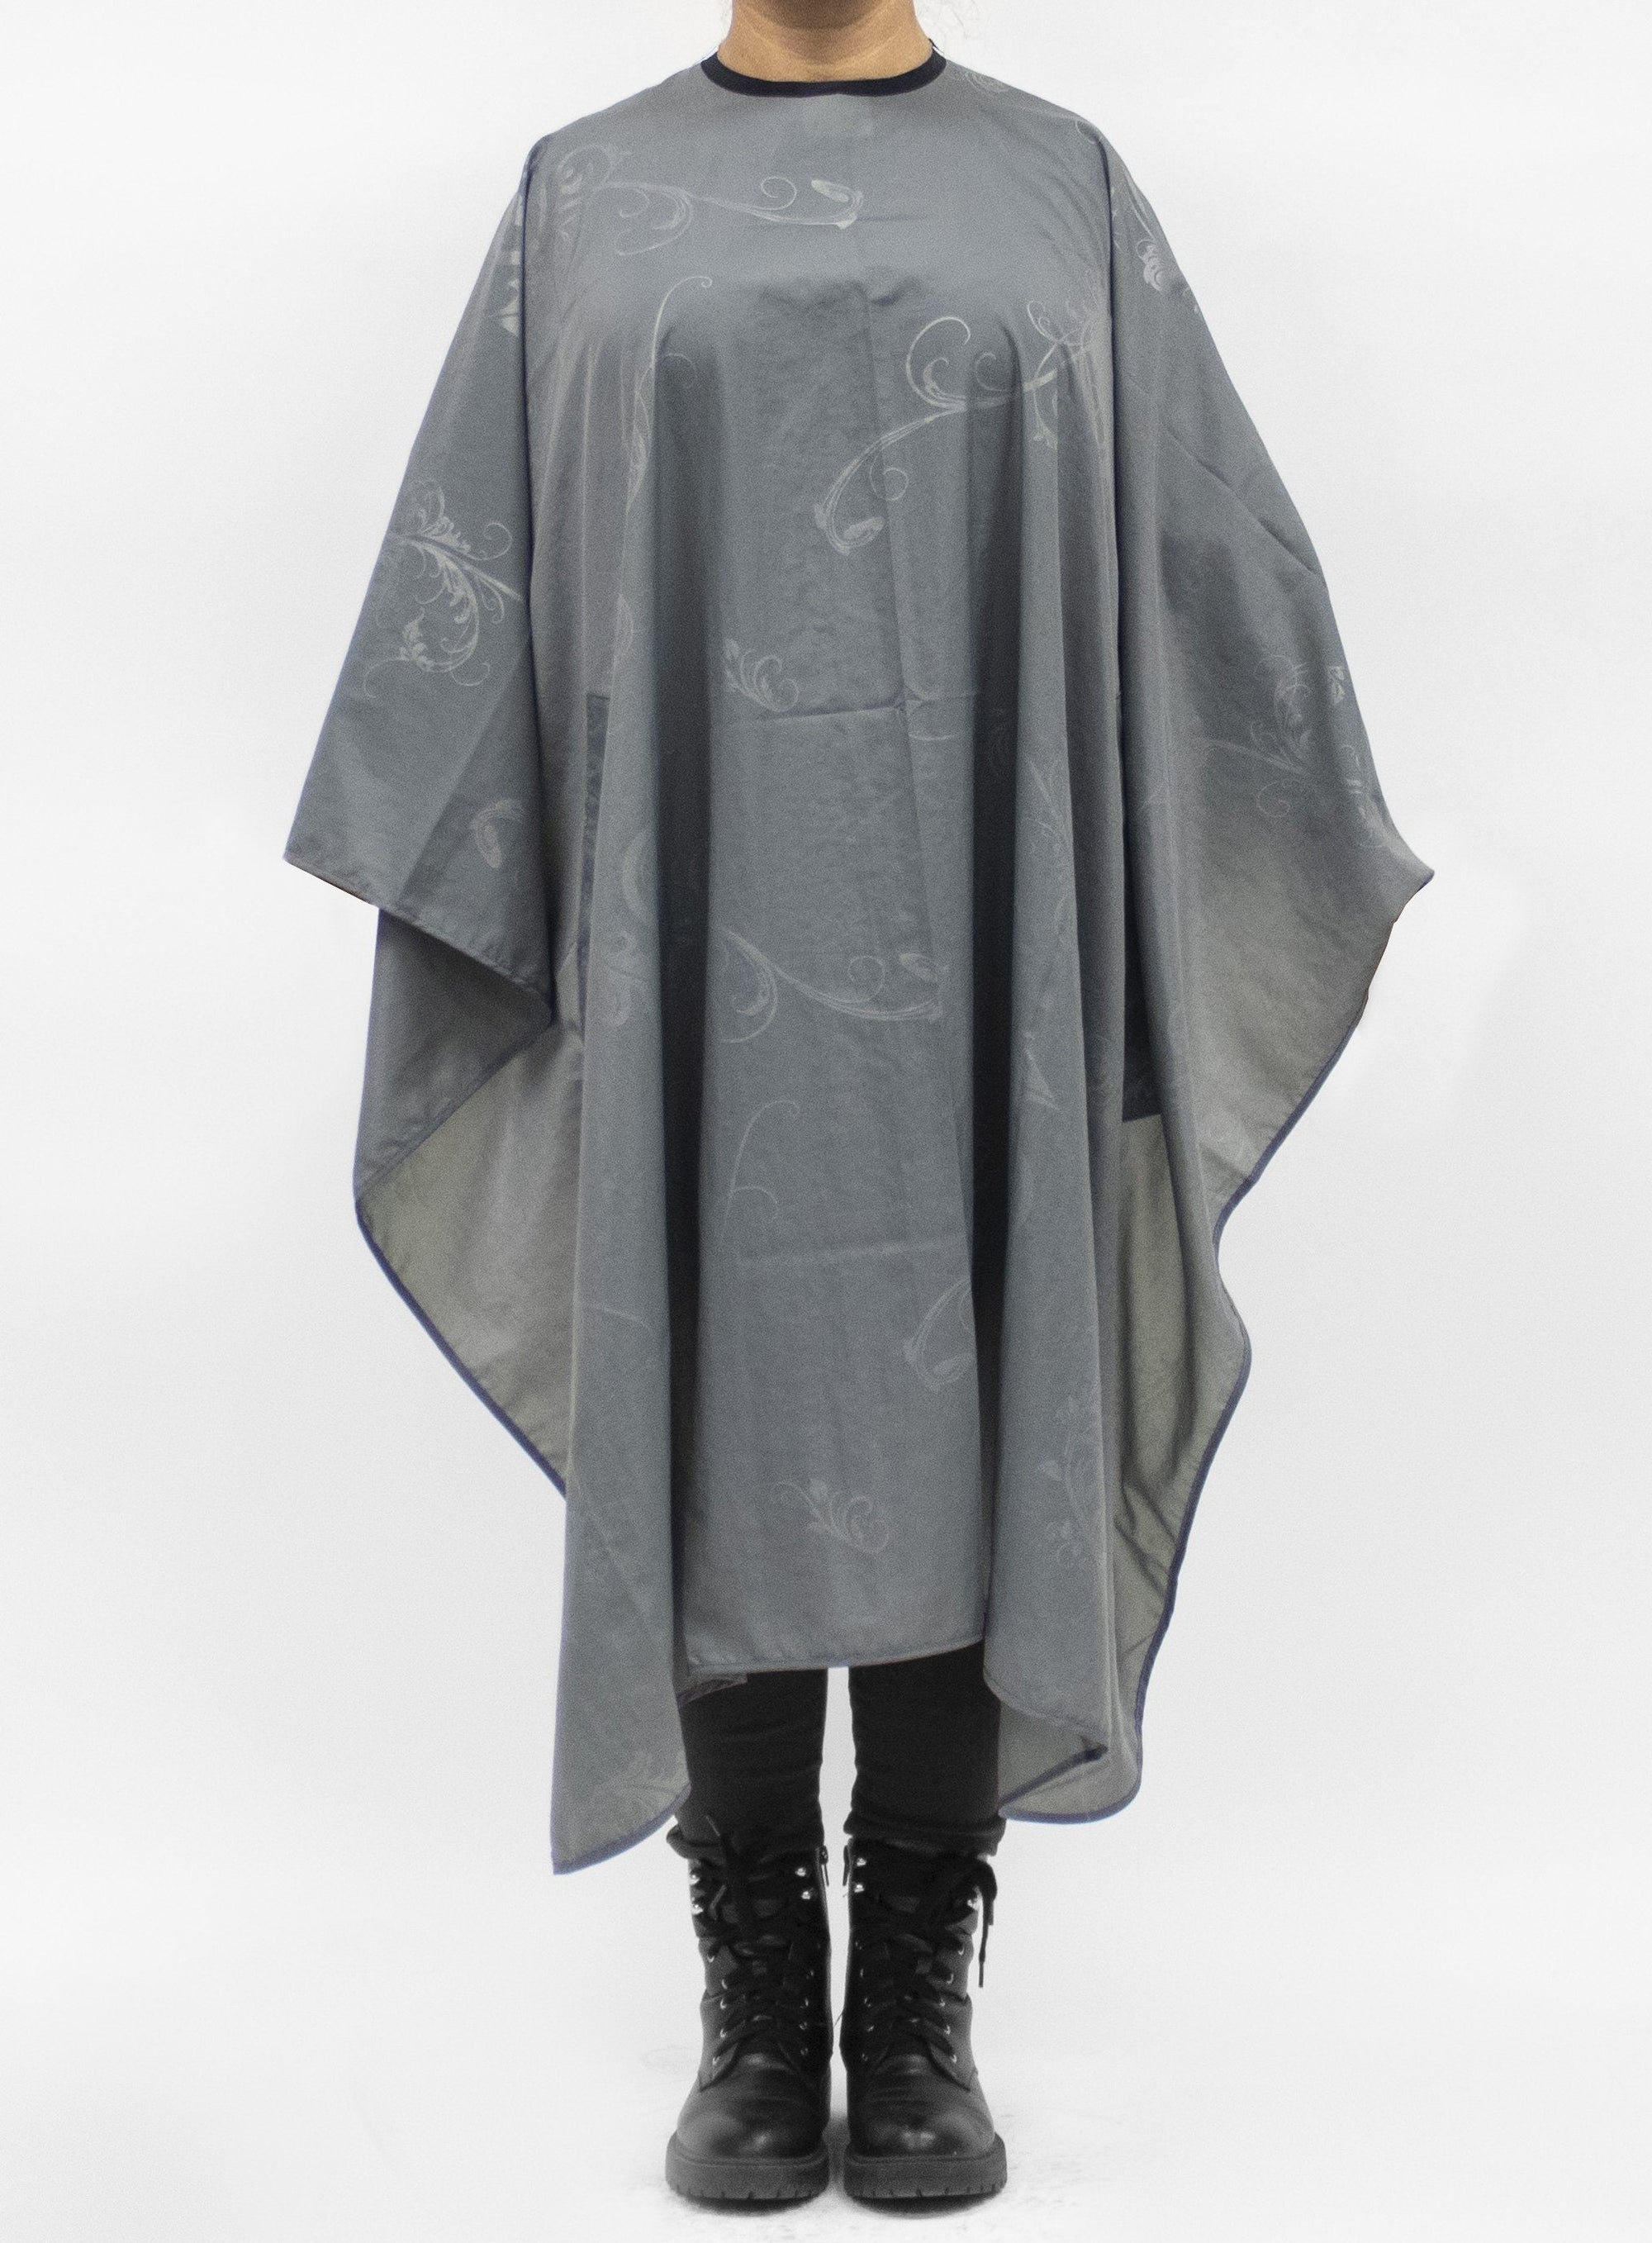 Baroque Cape For Cutting & Styling - Dark Grey HairArt Int'l Inc.